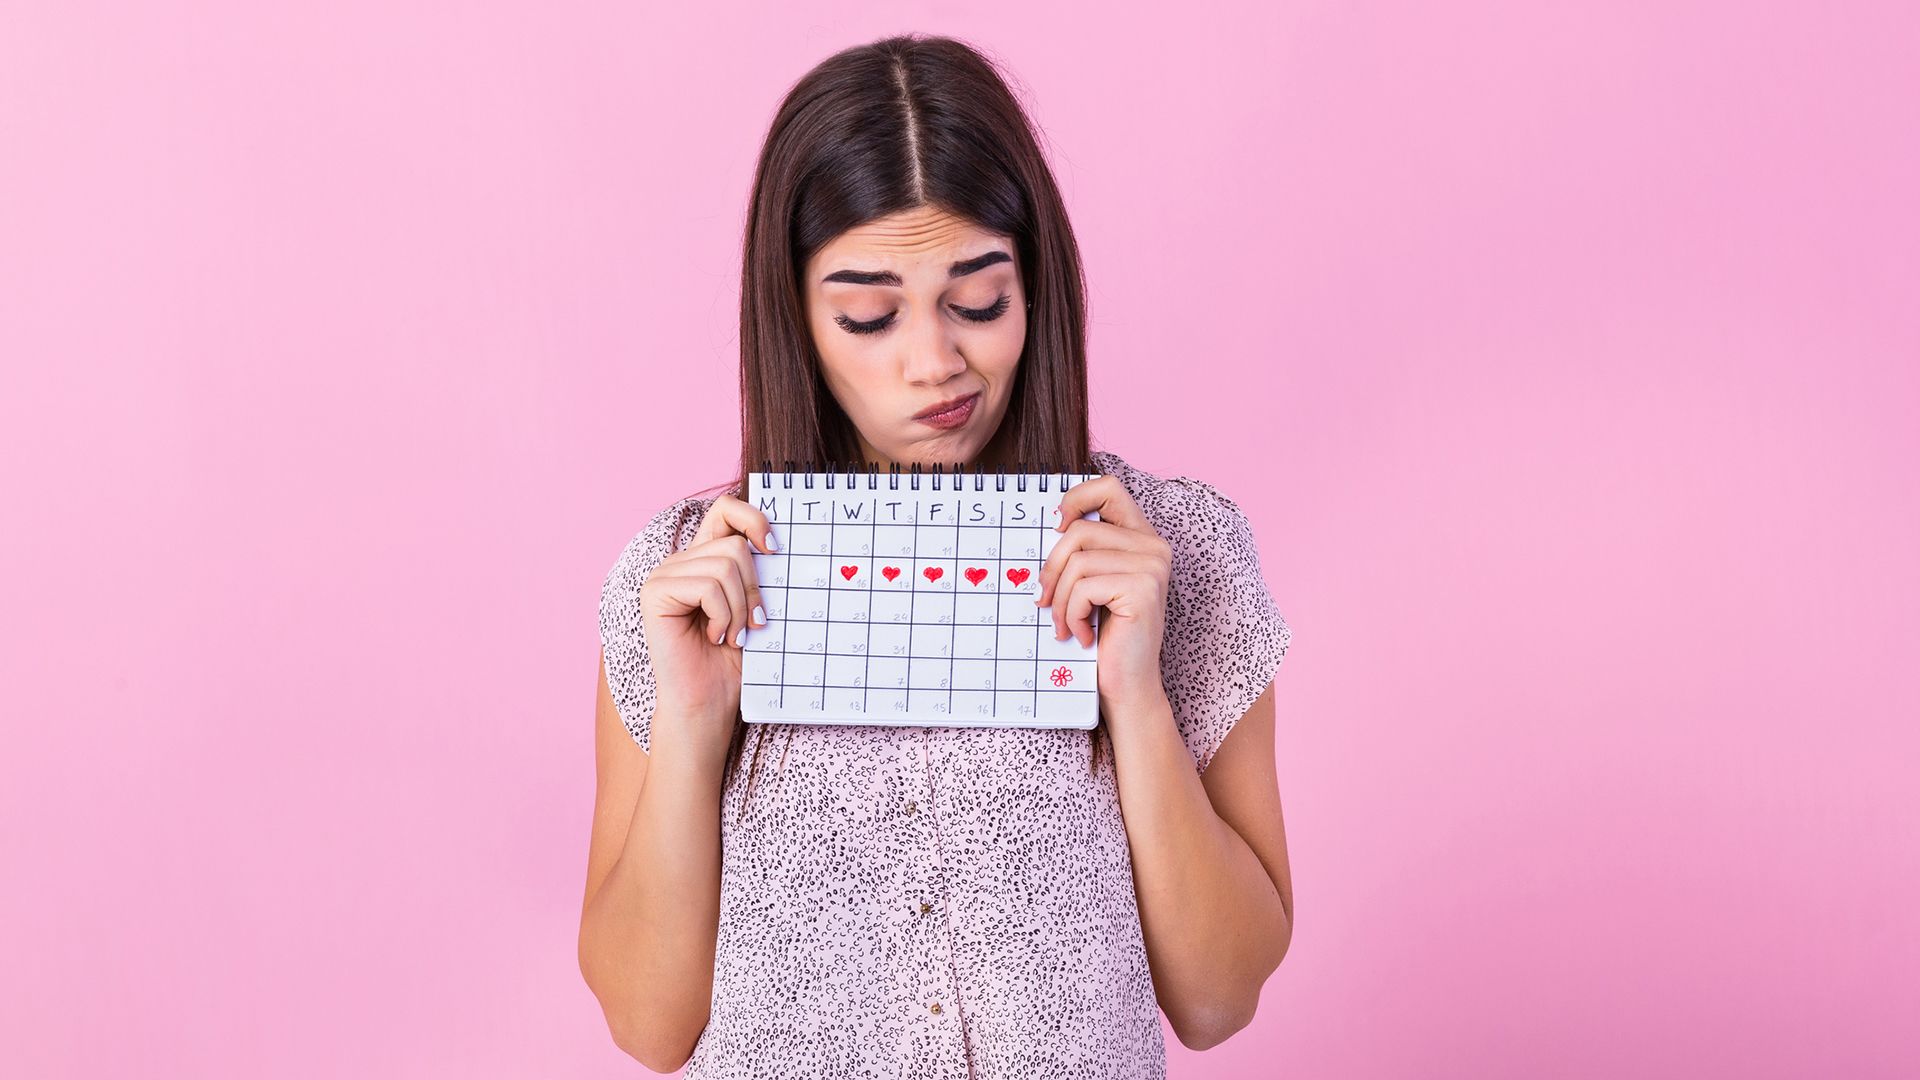 What Actually Happens During Your Menstrual Cycle?